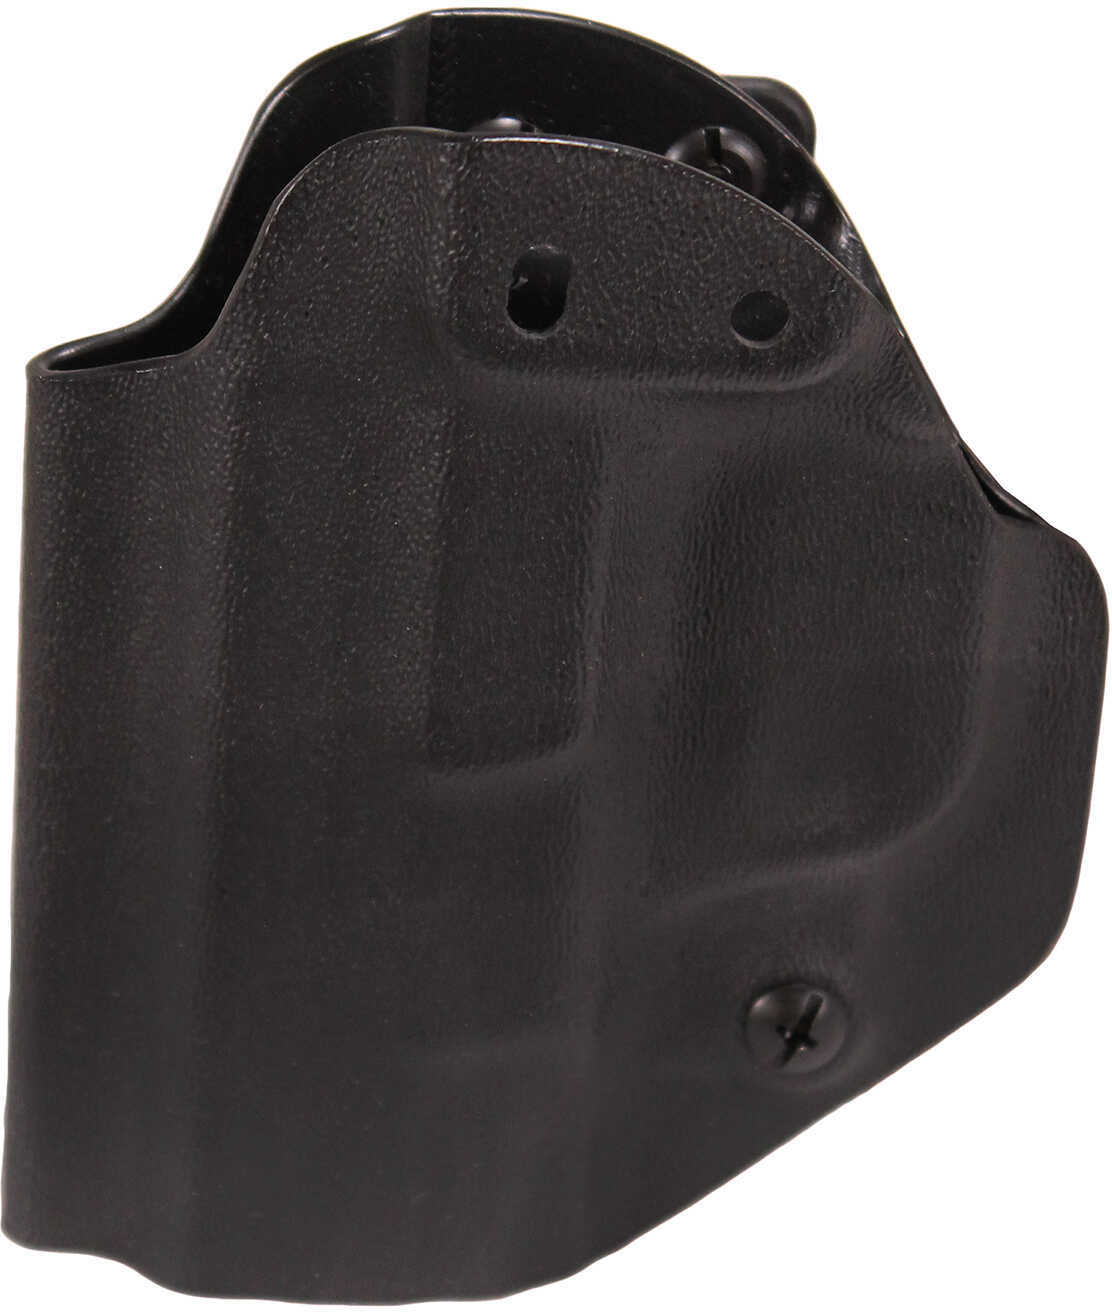 Mission First Tactical Inside Waistband Holster Ambidextrous Fits Smih & Wesson M&P SHIELD Kydex Includes 1.5" Belt Atta